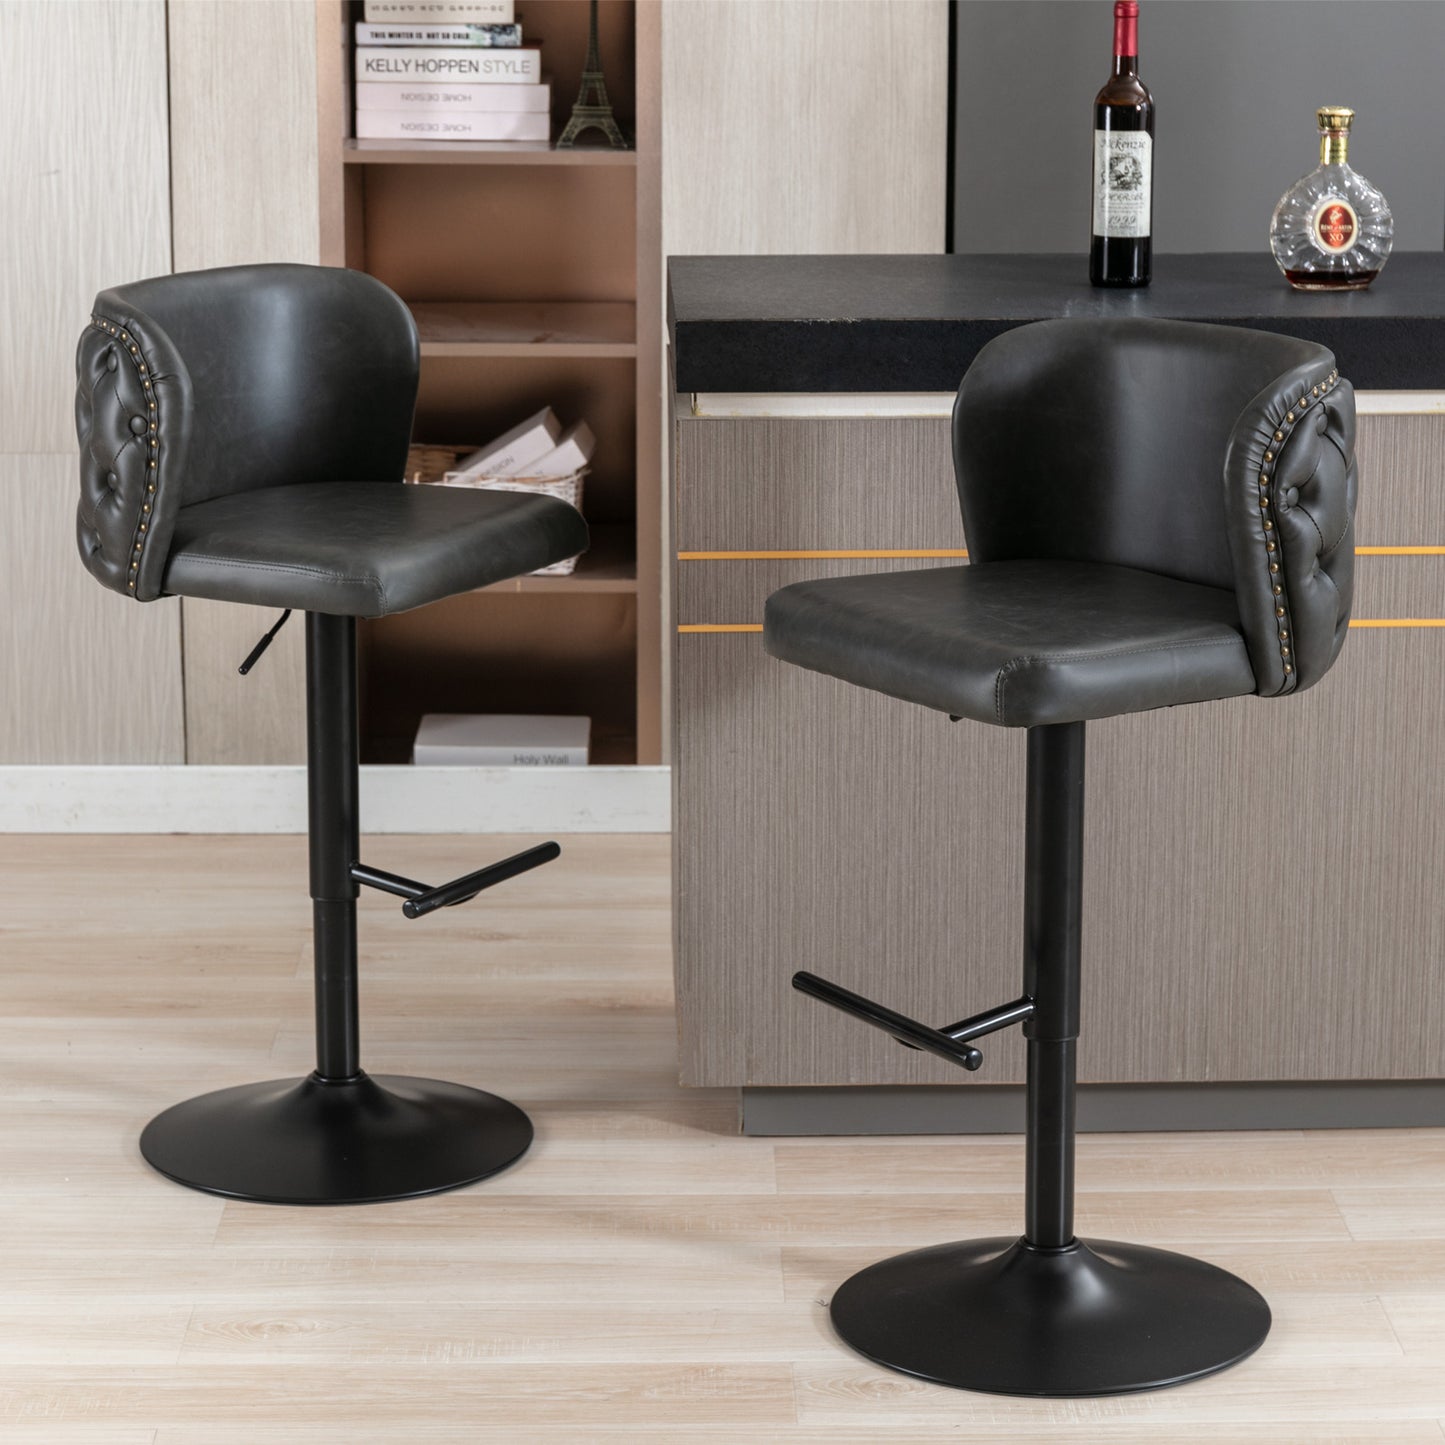 A&A Furniture, Charcoal Grey Vegan Leather Upholstered Swivel Barstools (Set of 2）